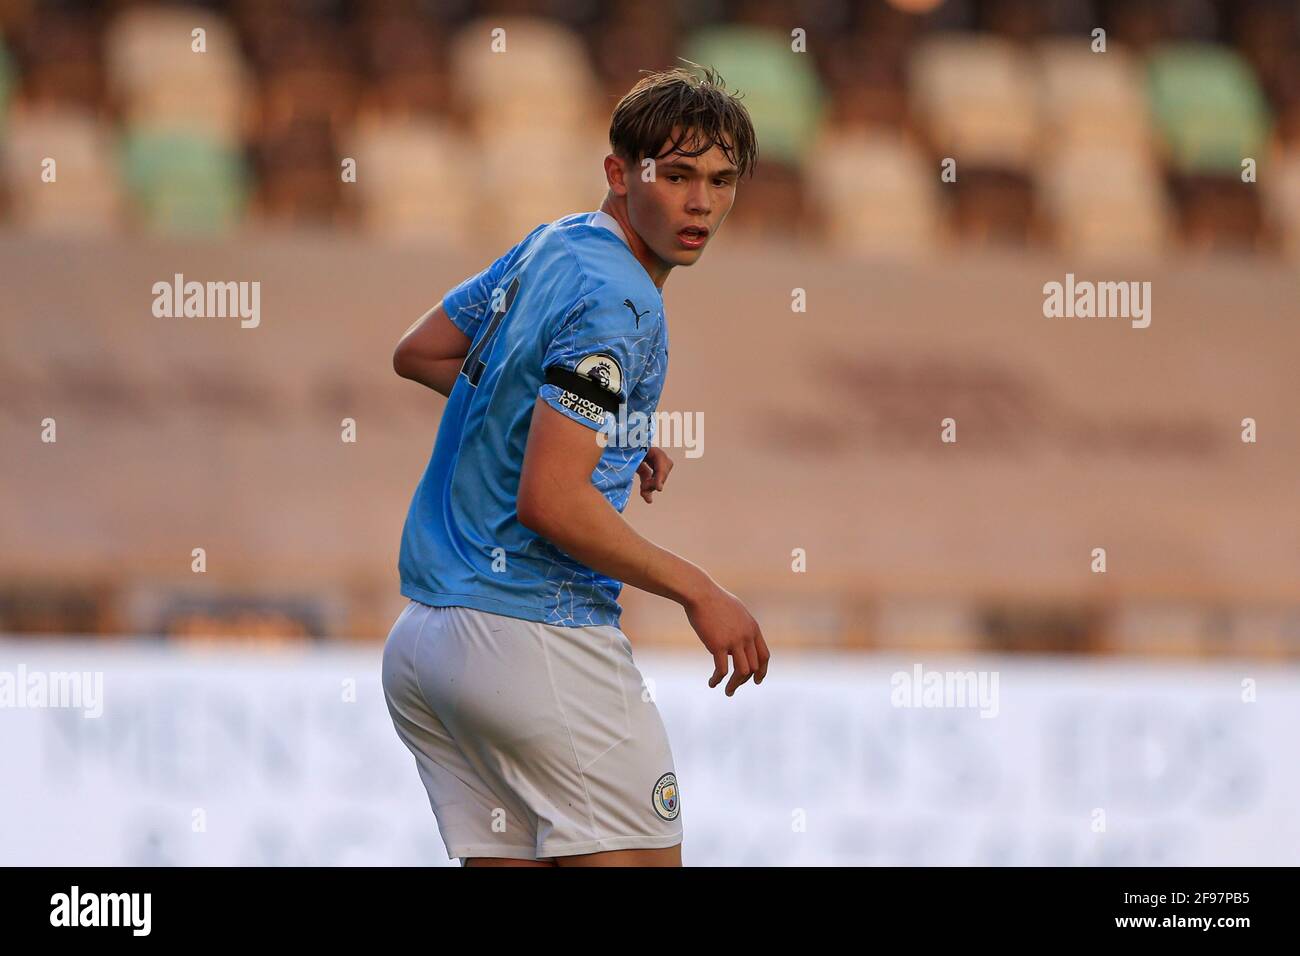 Manchester, UK. 16th Apr, 2021. Callum Doyle #4 of Manchester City in Manchester, UK on 4/16/2021. (Photo by Conor Molloy/News Images/Sipa USA) Credit: Sipa USA/Alamy Live News Stock Photo